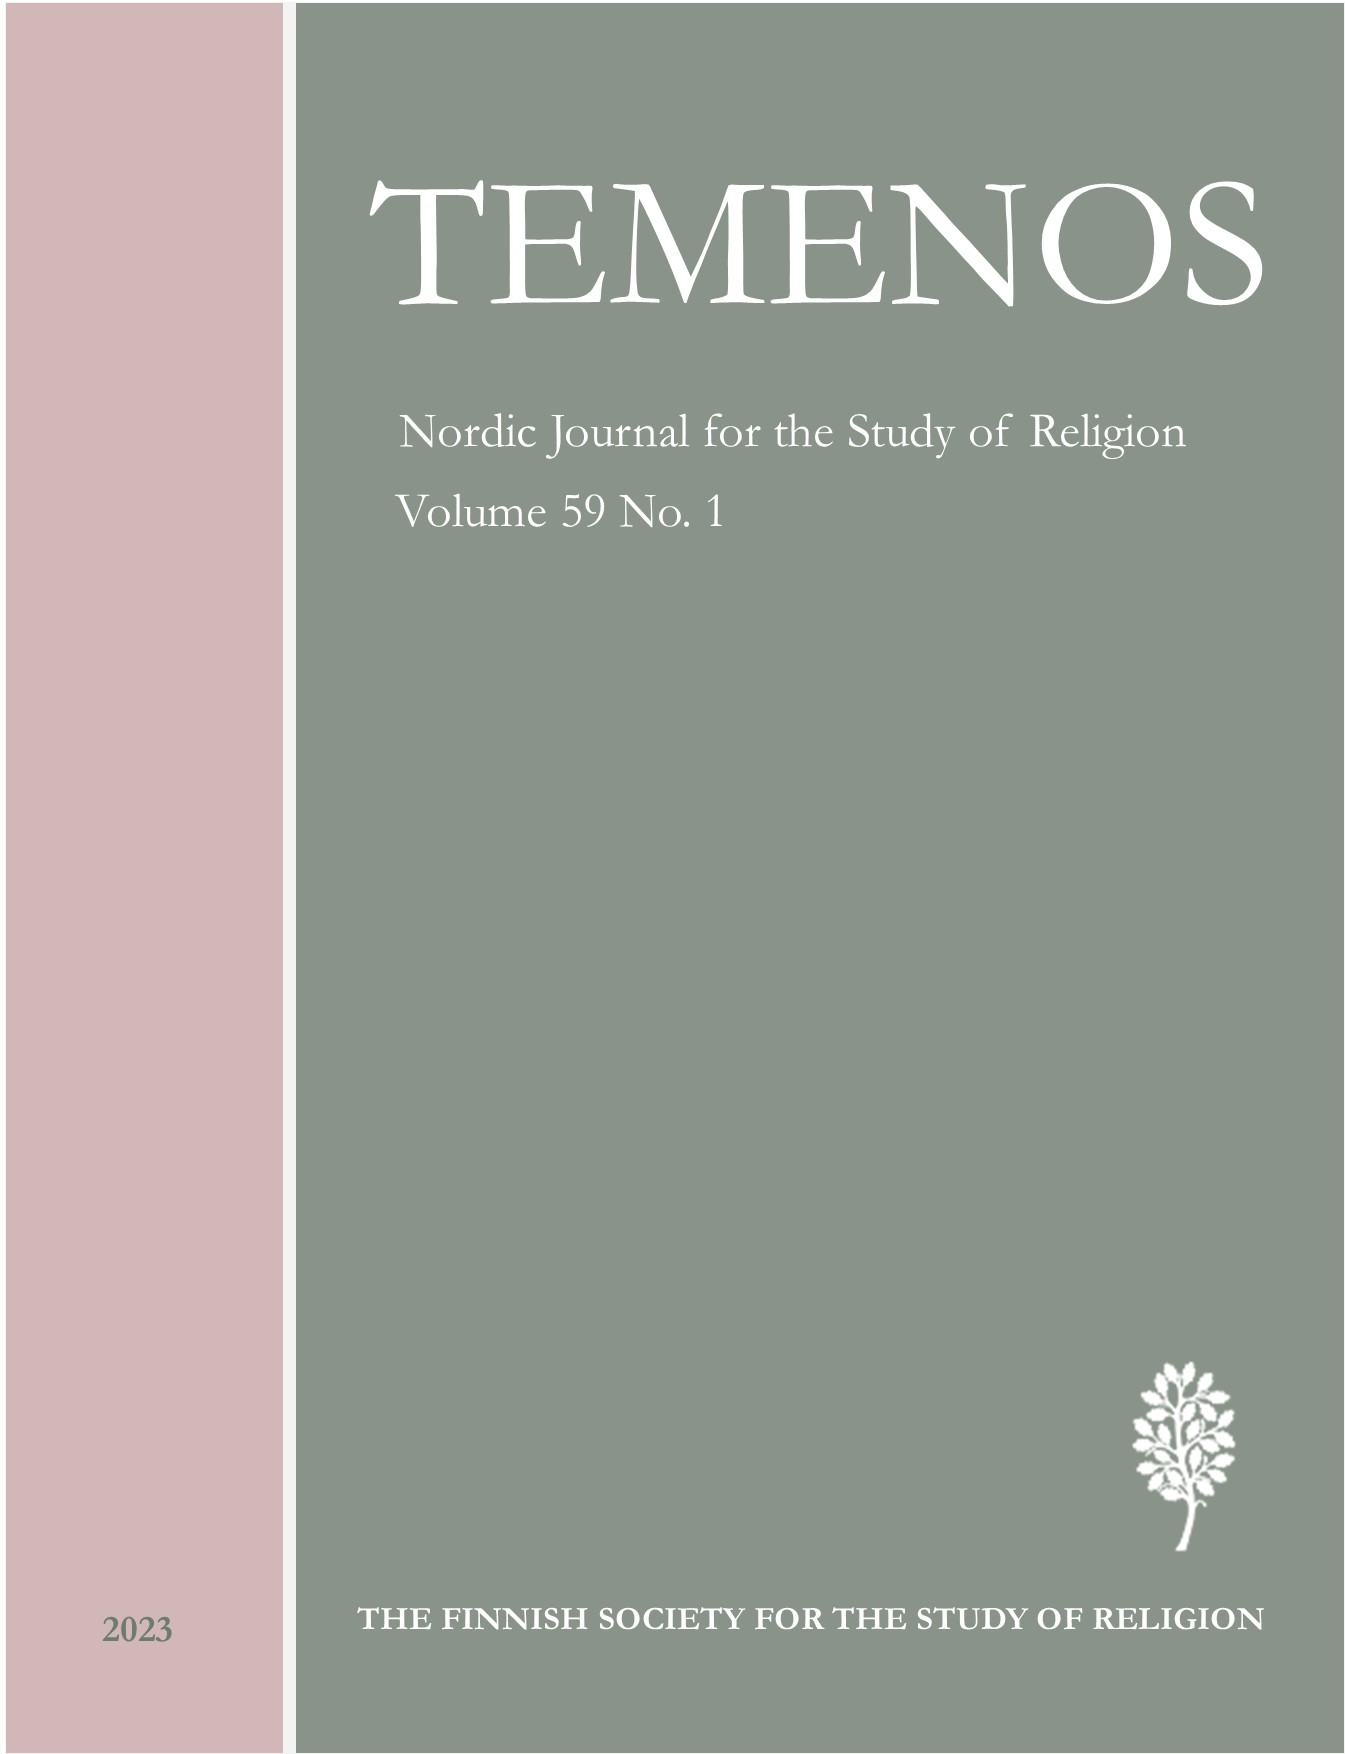 					View Vol. 59 No. 1 (2023): Temenos - Nordic Journal for the Study of Religion 
				